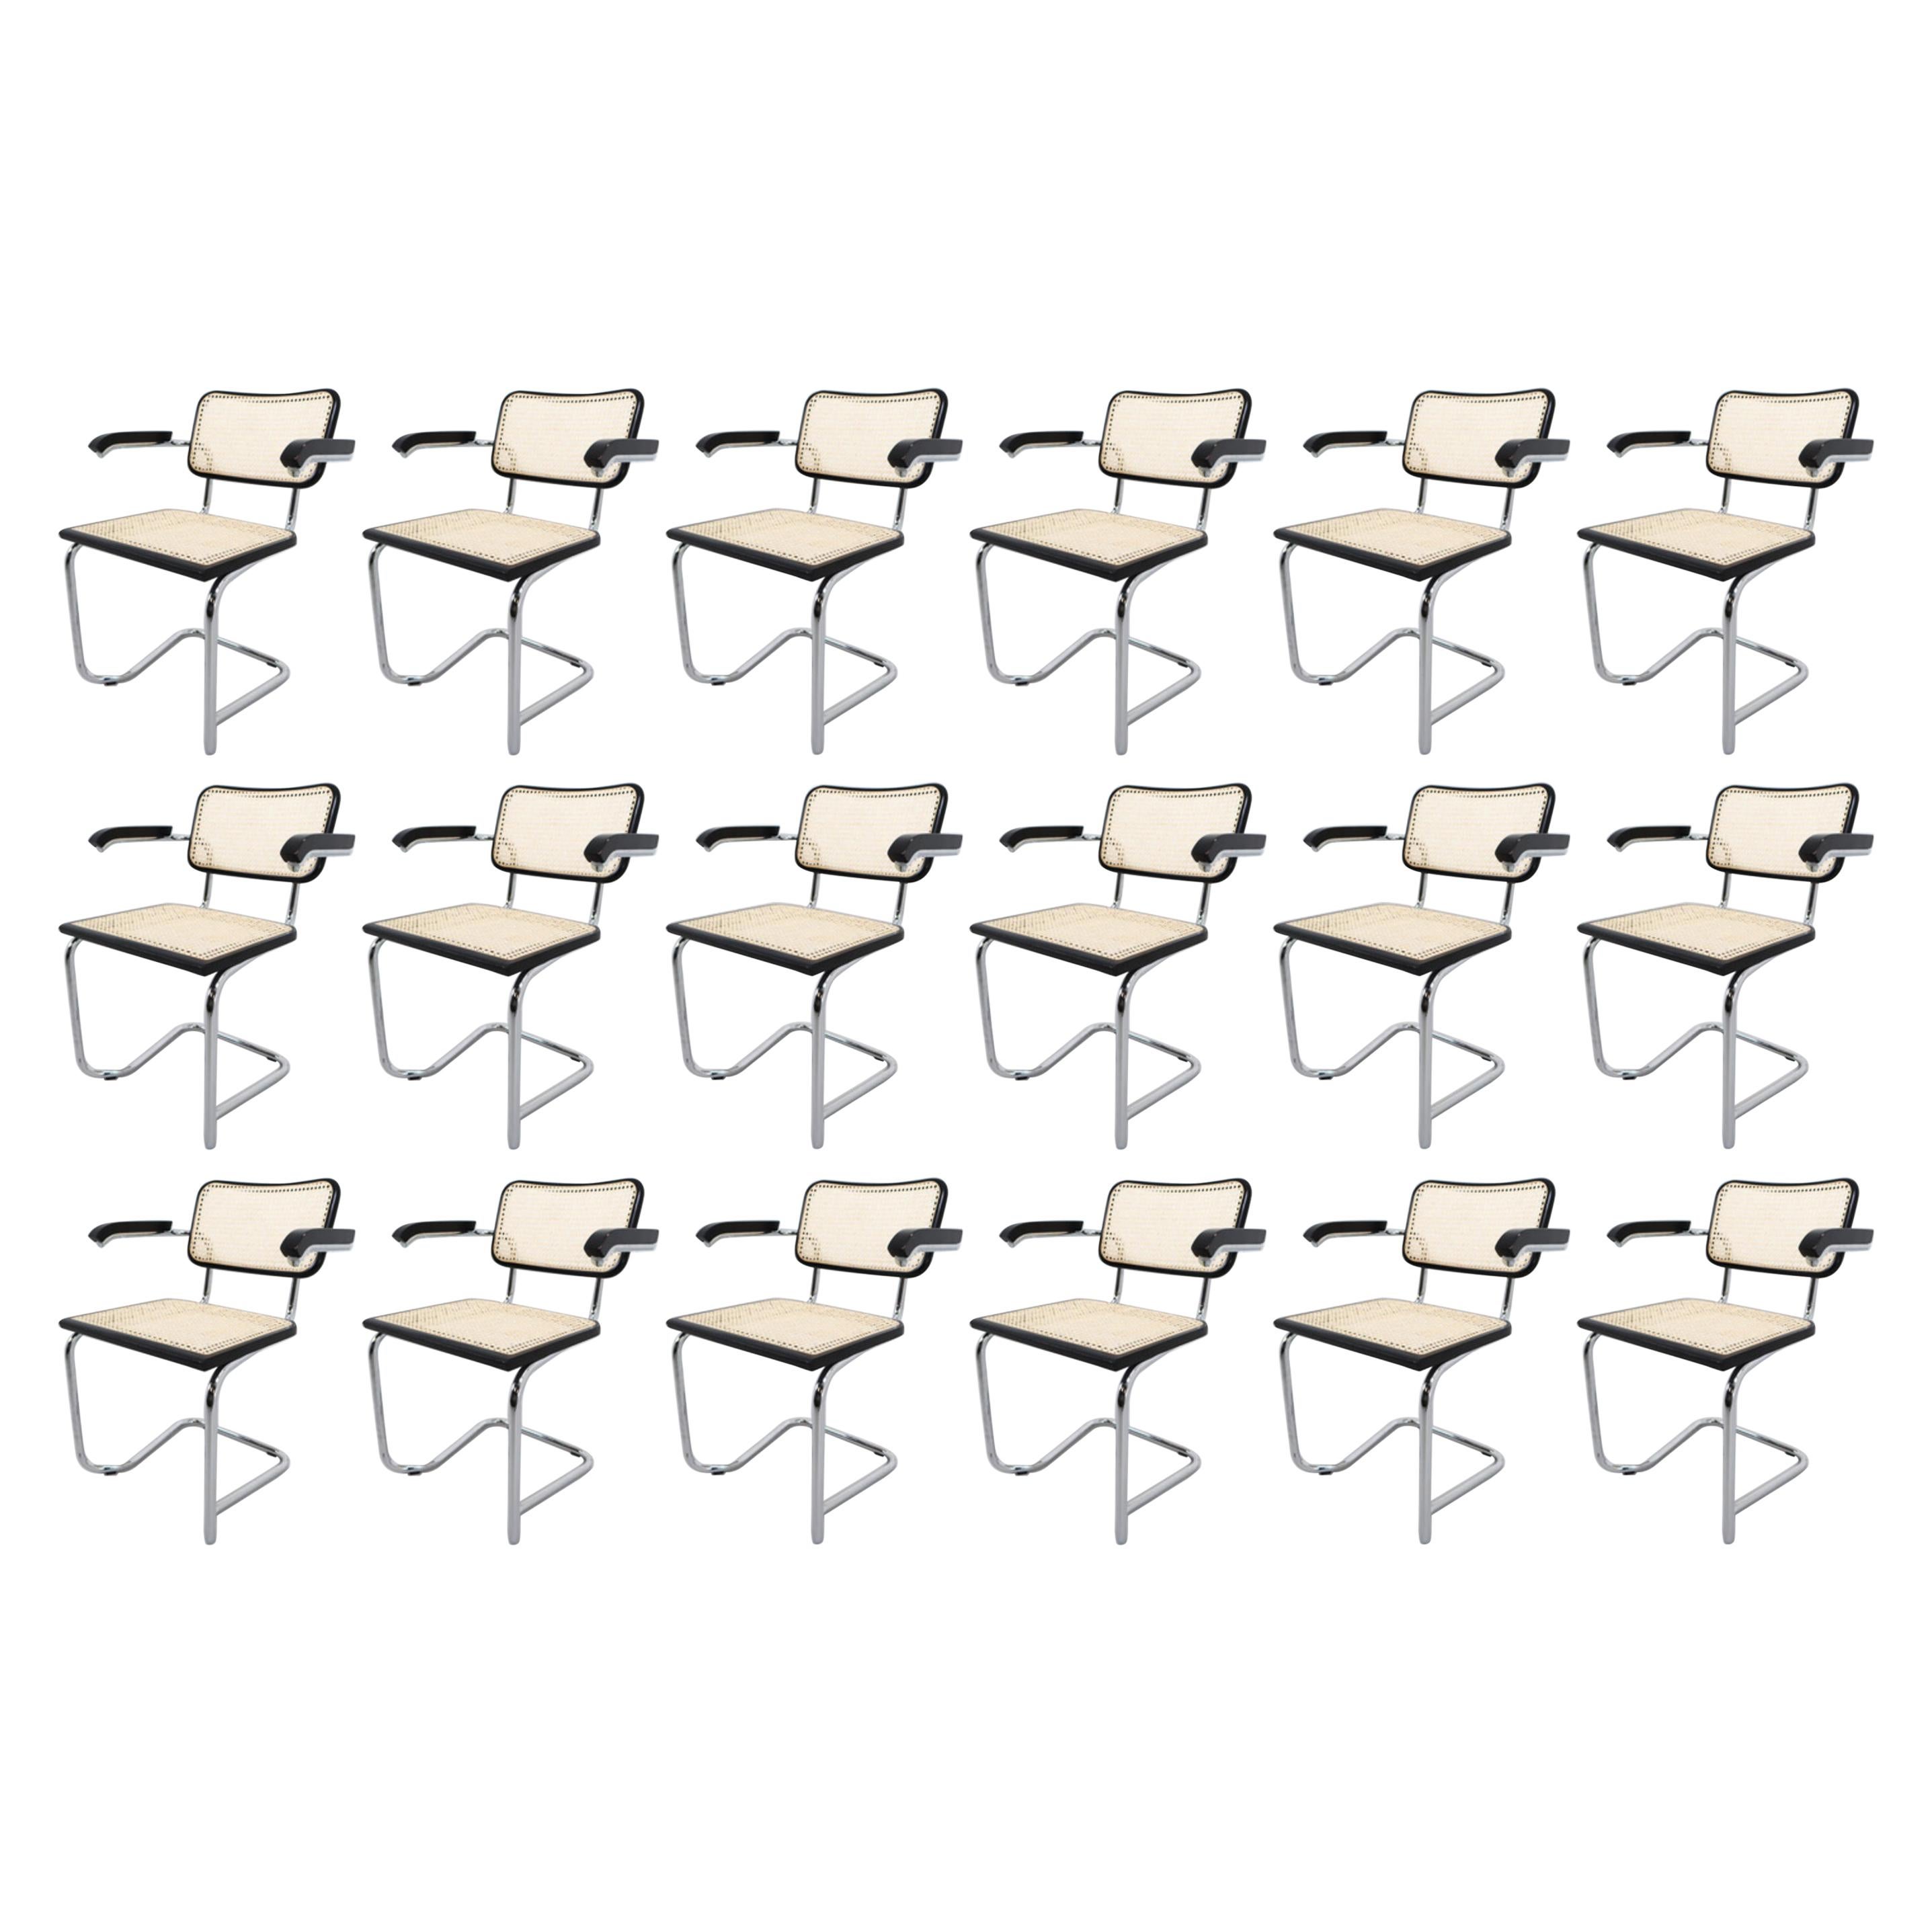 Set of 50 Marcel Breuer Bauhaus "Cesca" Armchairs, Manufactured in Italy